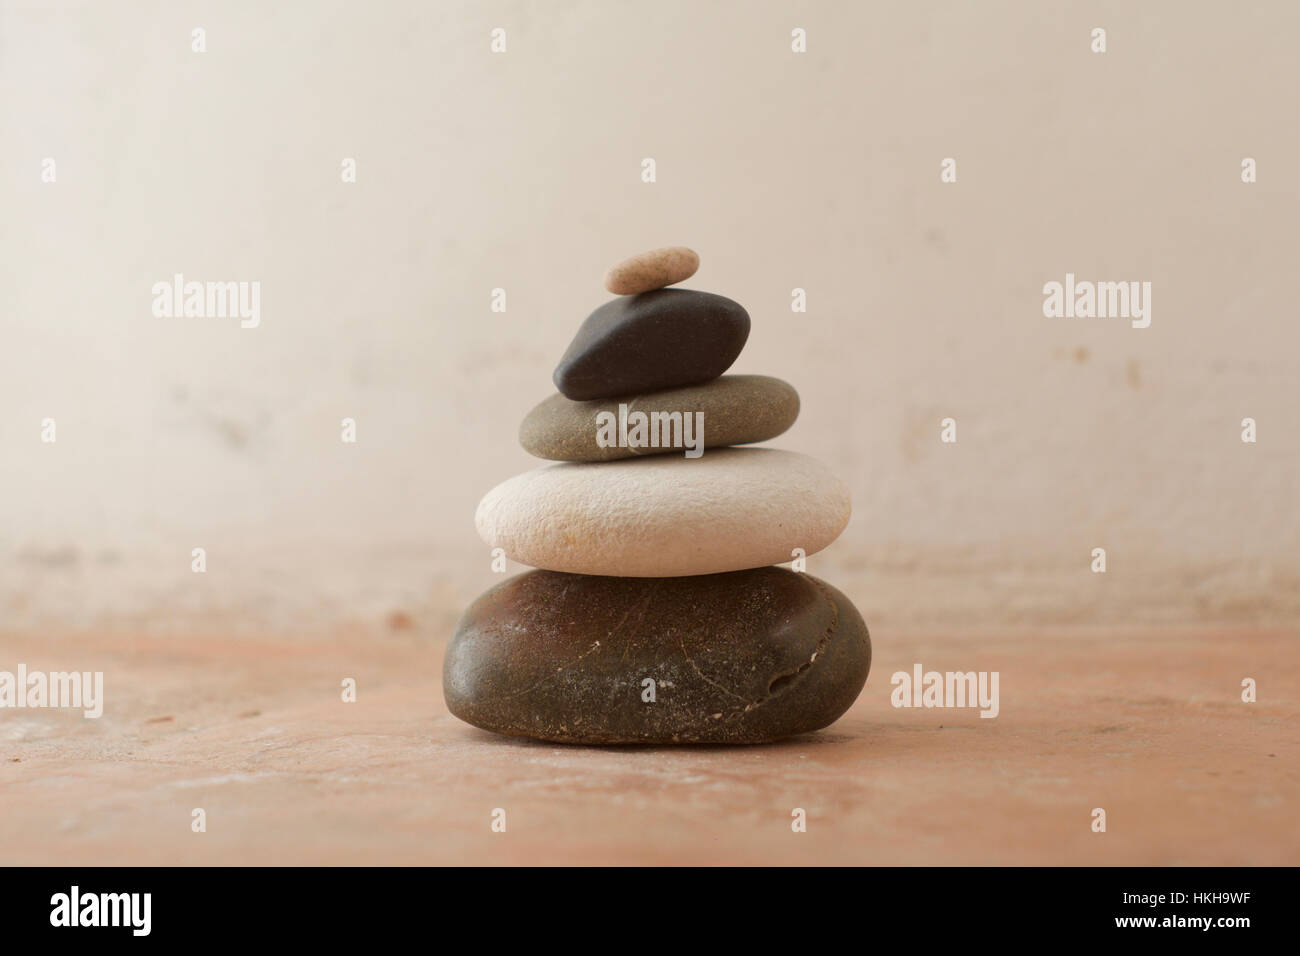 A stack of pebbles with grey tones against a rustic background Stock Photo